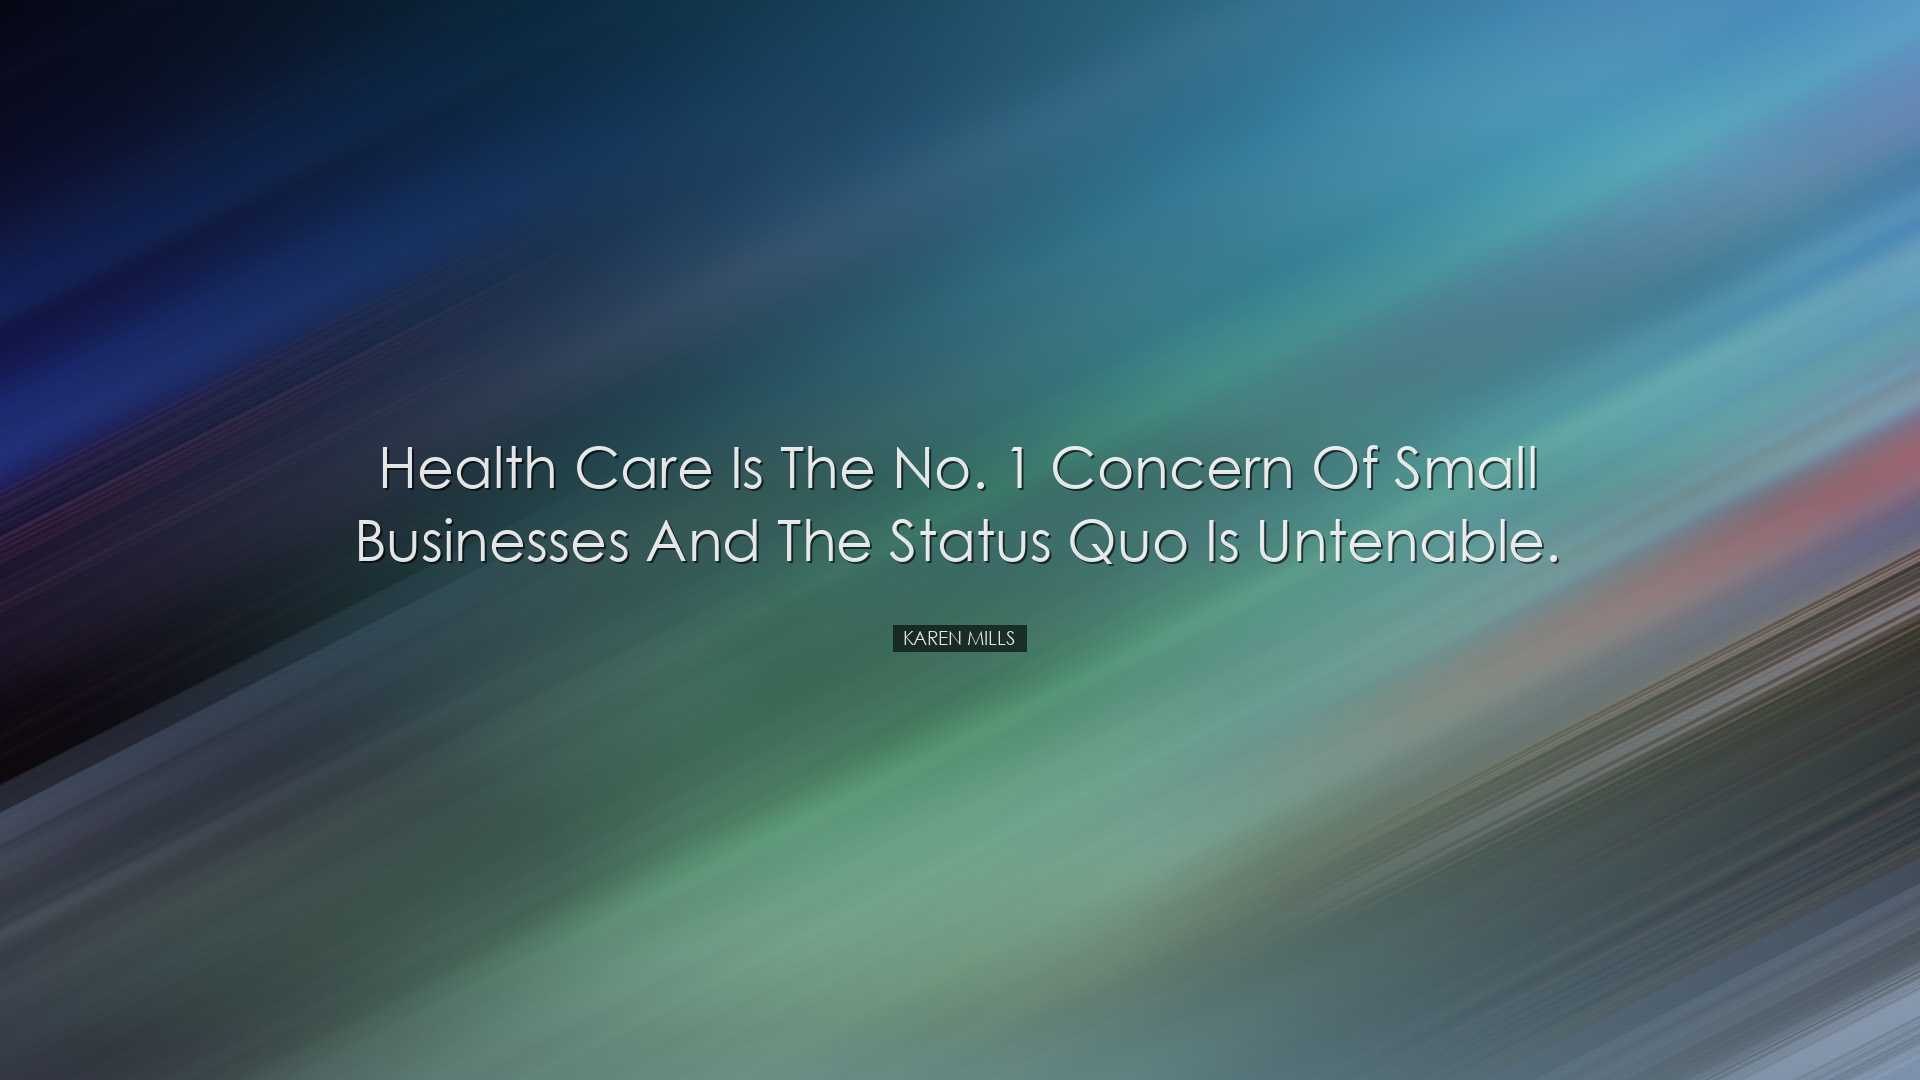 Health care is the No. 1 concern of small businesses and the statu